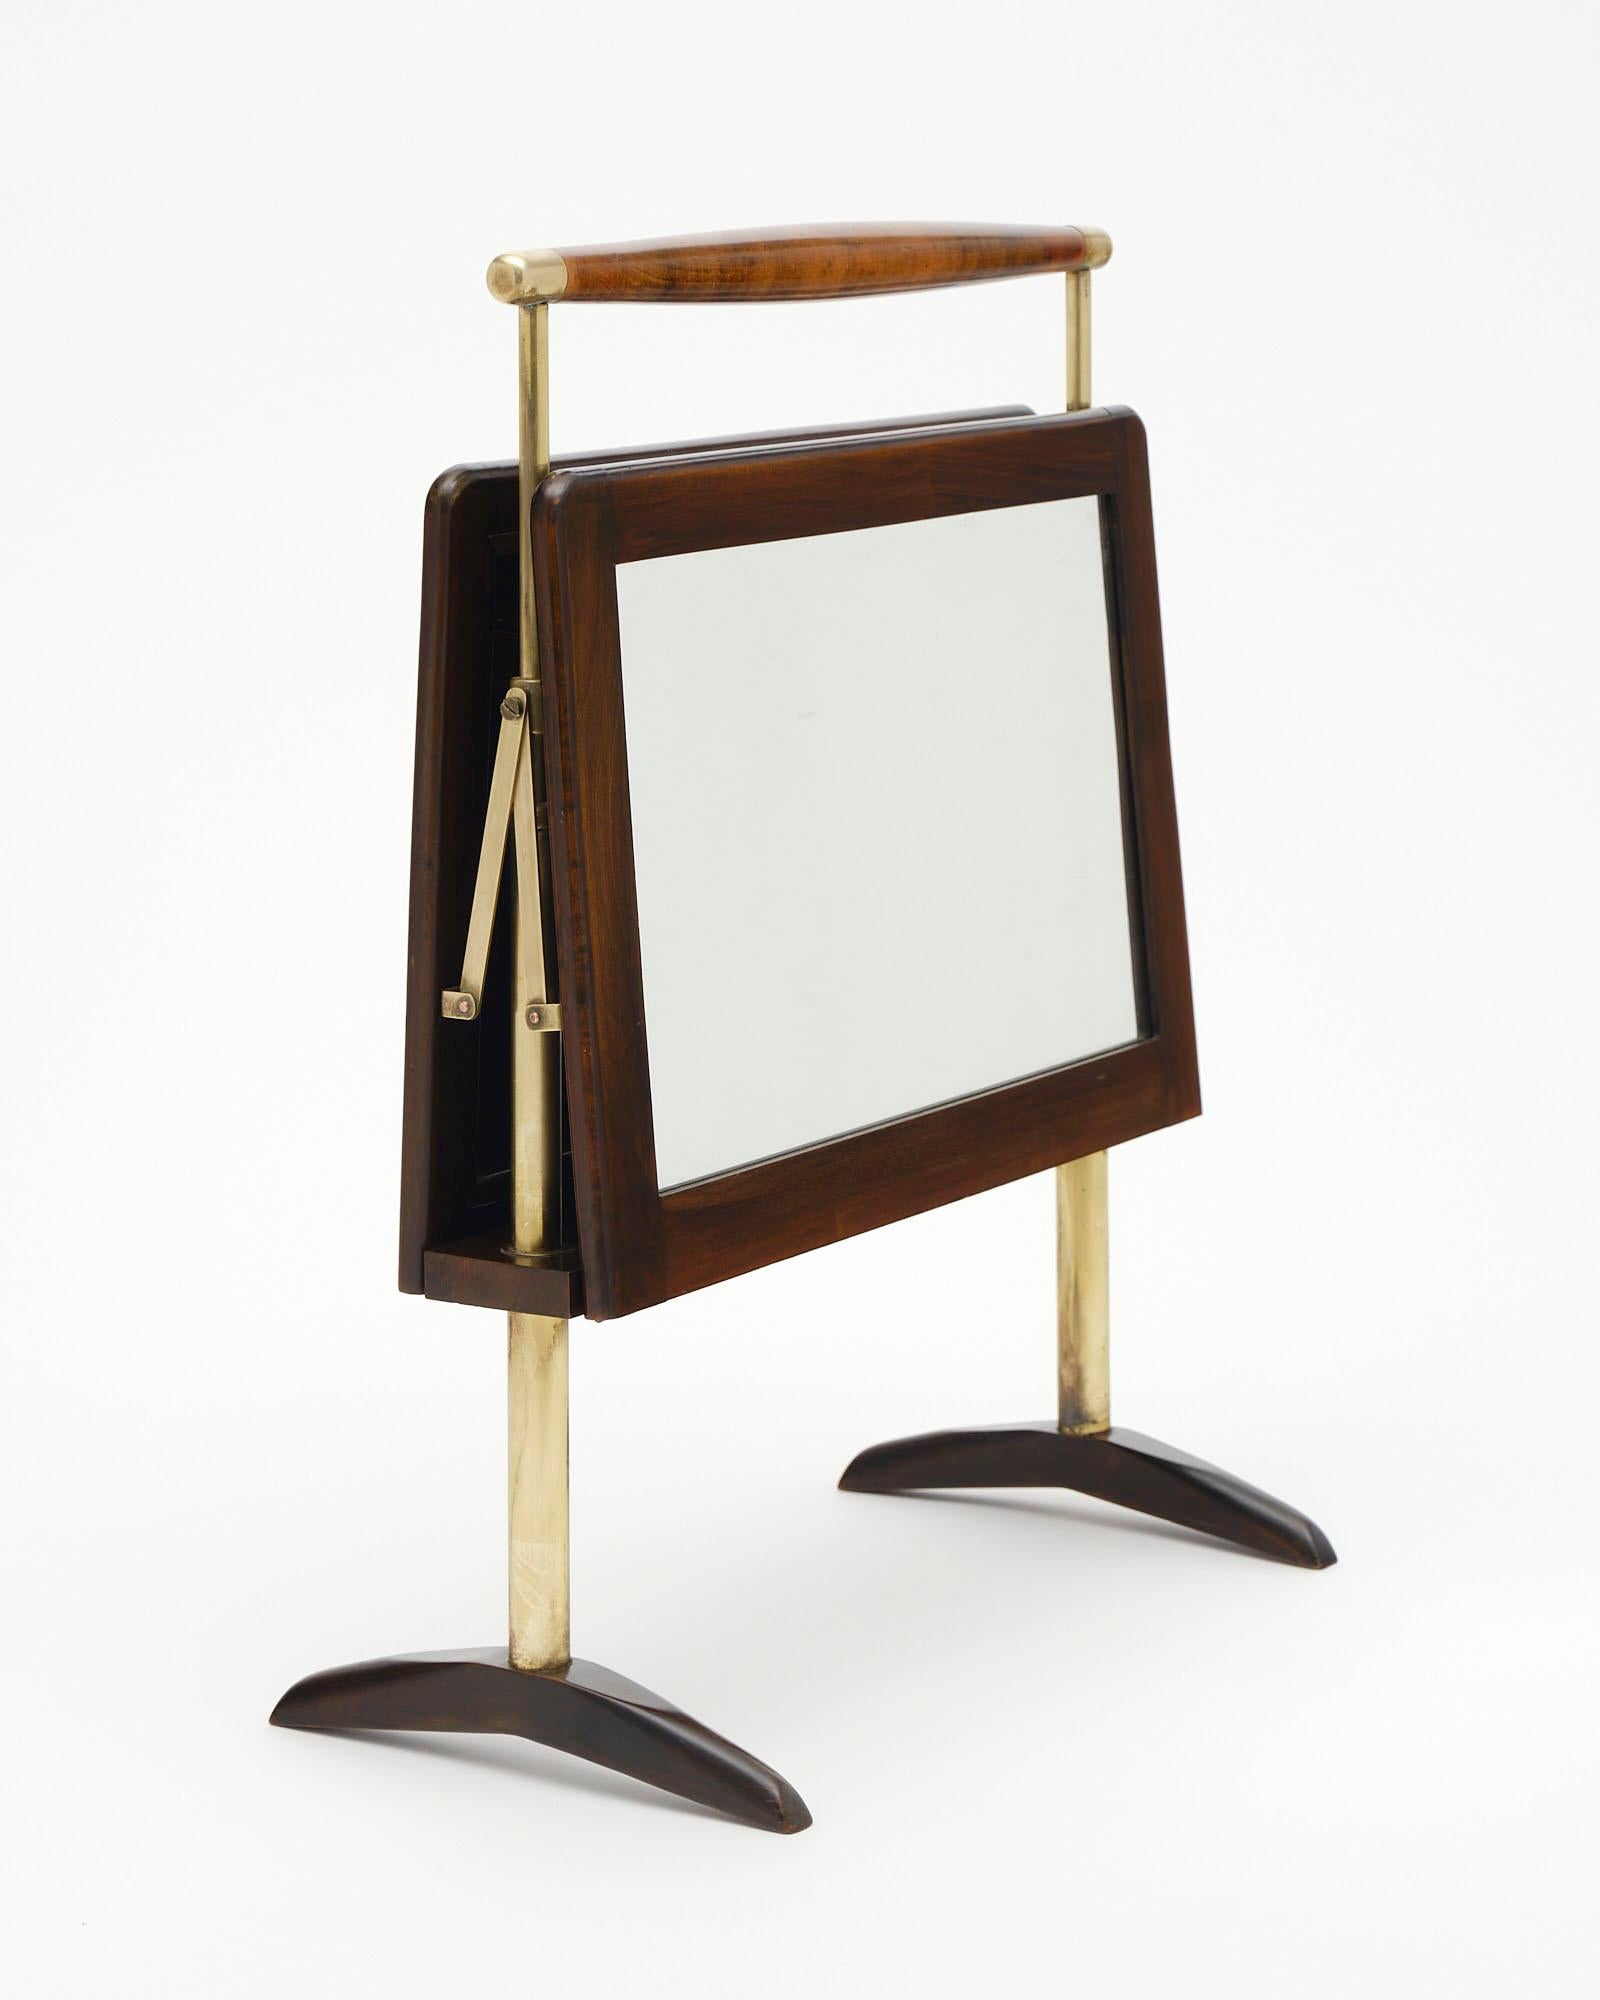 Italian magazine stand; from Verona. This unique piece is made of rosewood and brass with mirrored panels on both sides. This sleek design was inspired by the Ico Parisi was an Italian architect and designer Ico Parisi.

Dimensions are with the